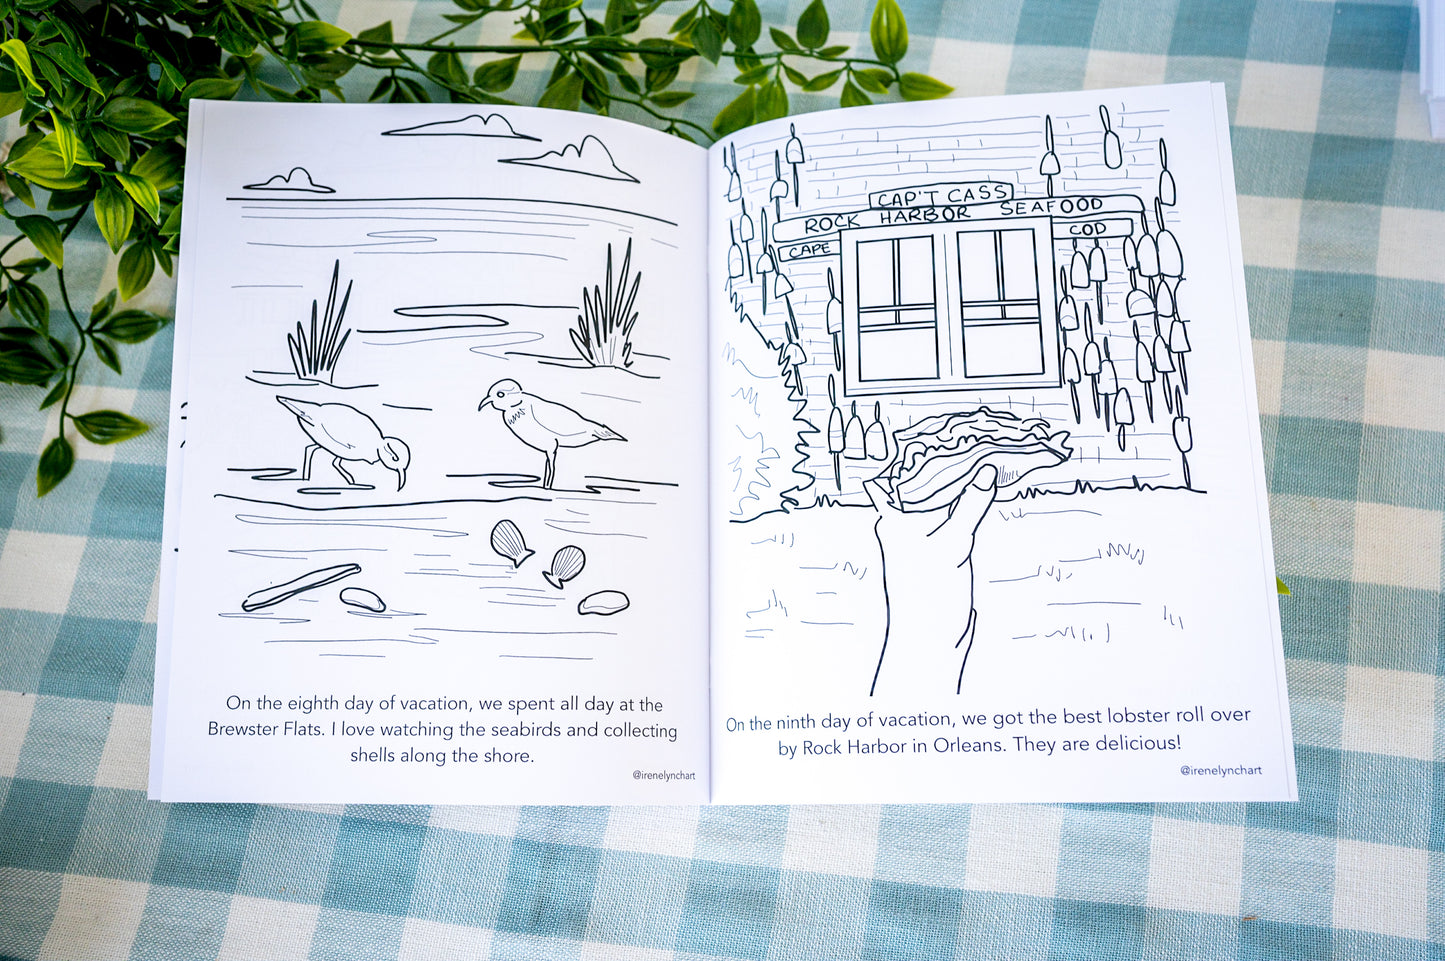 "A Cape Cod Vacation In Color" A Coloring Book for All Ages